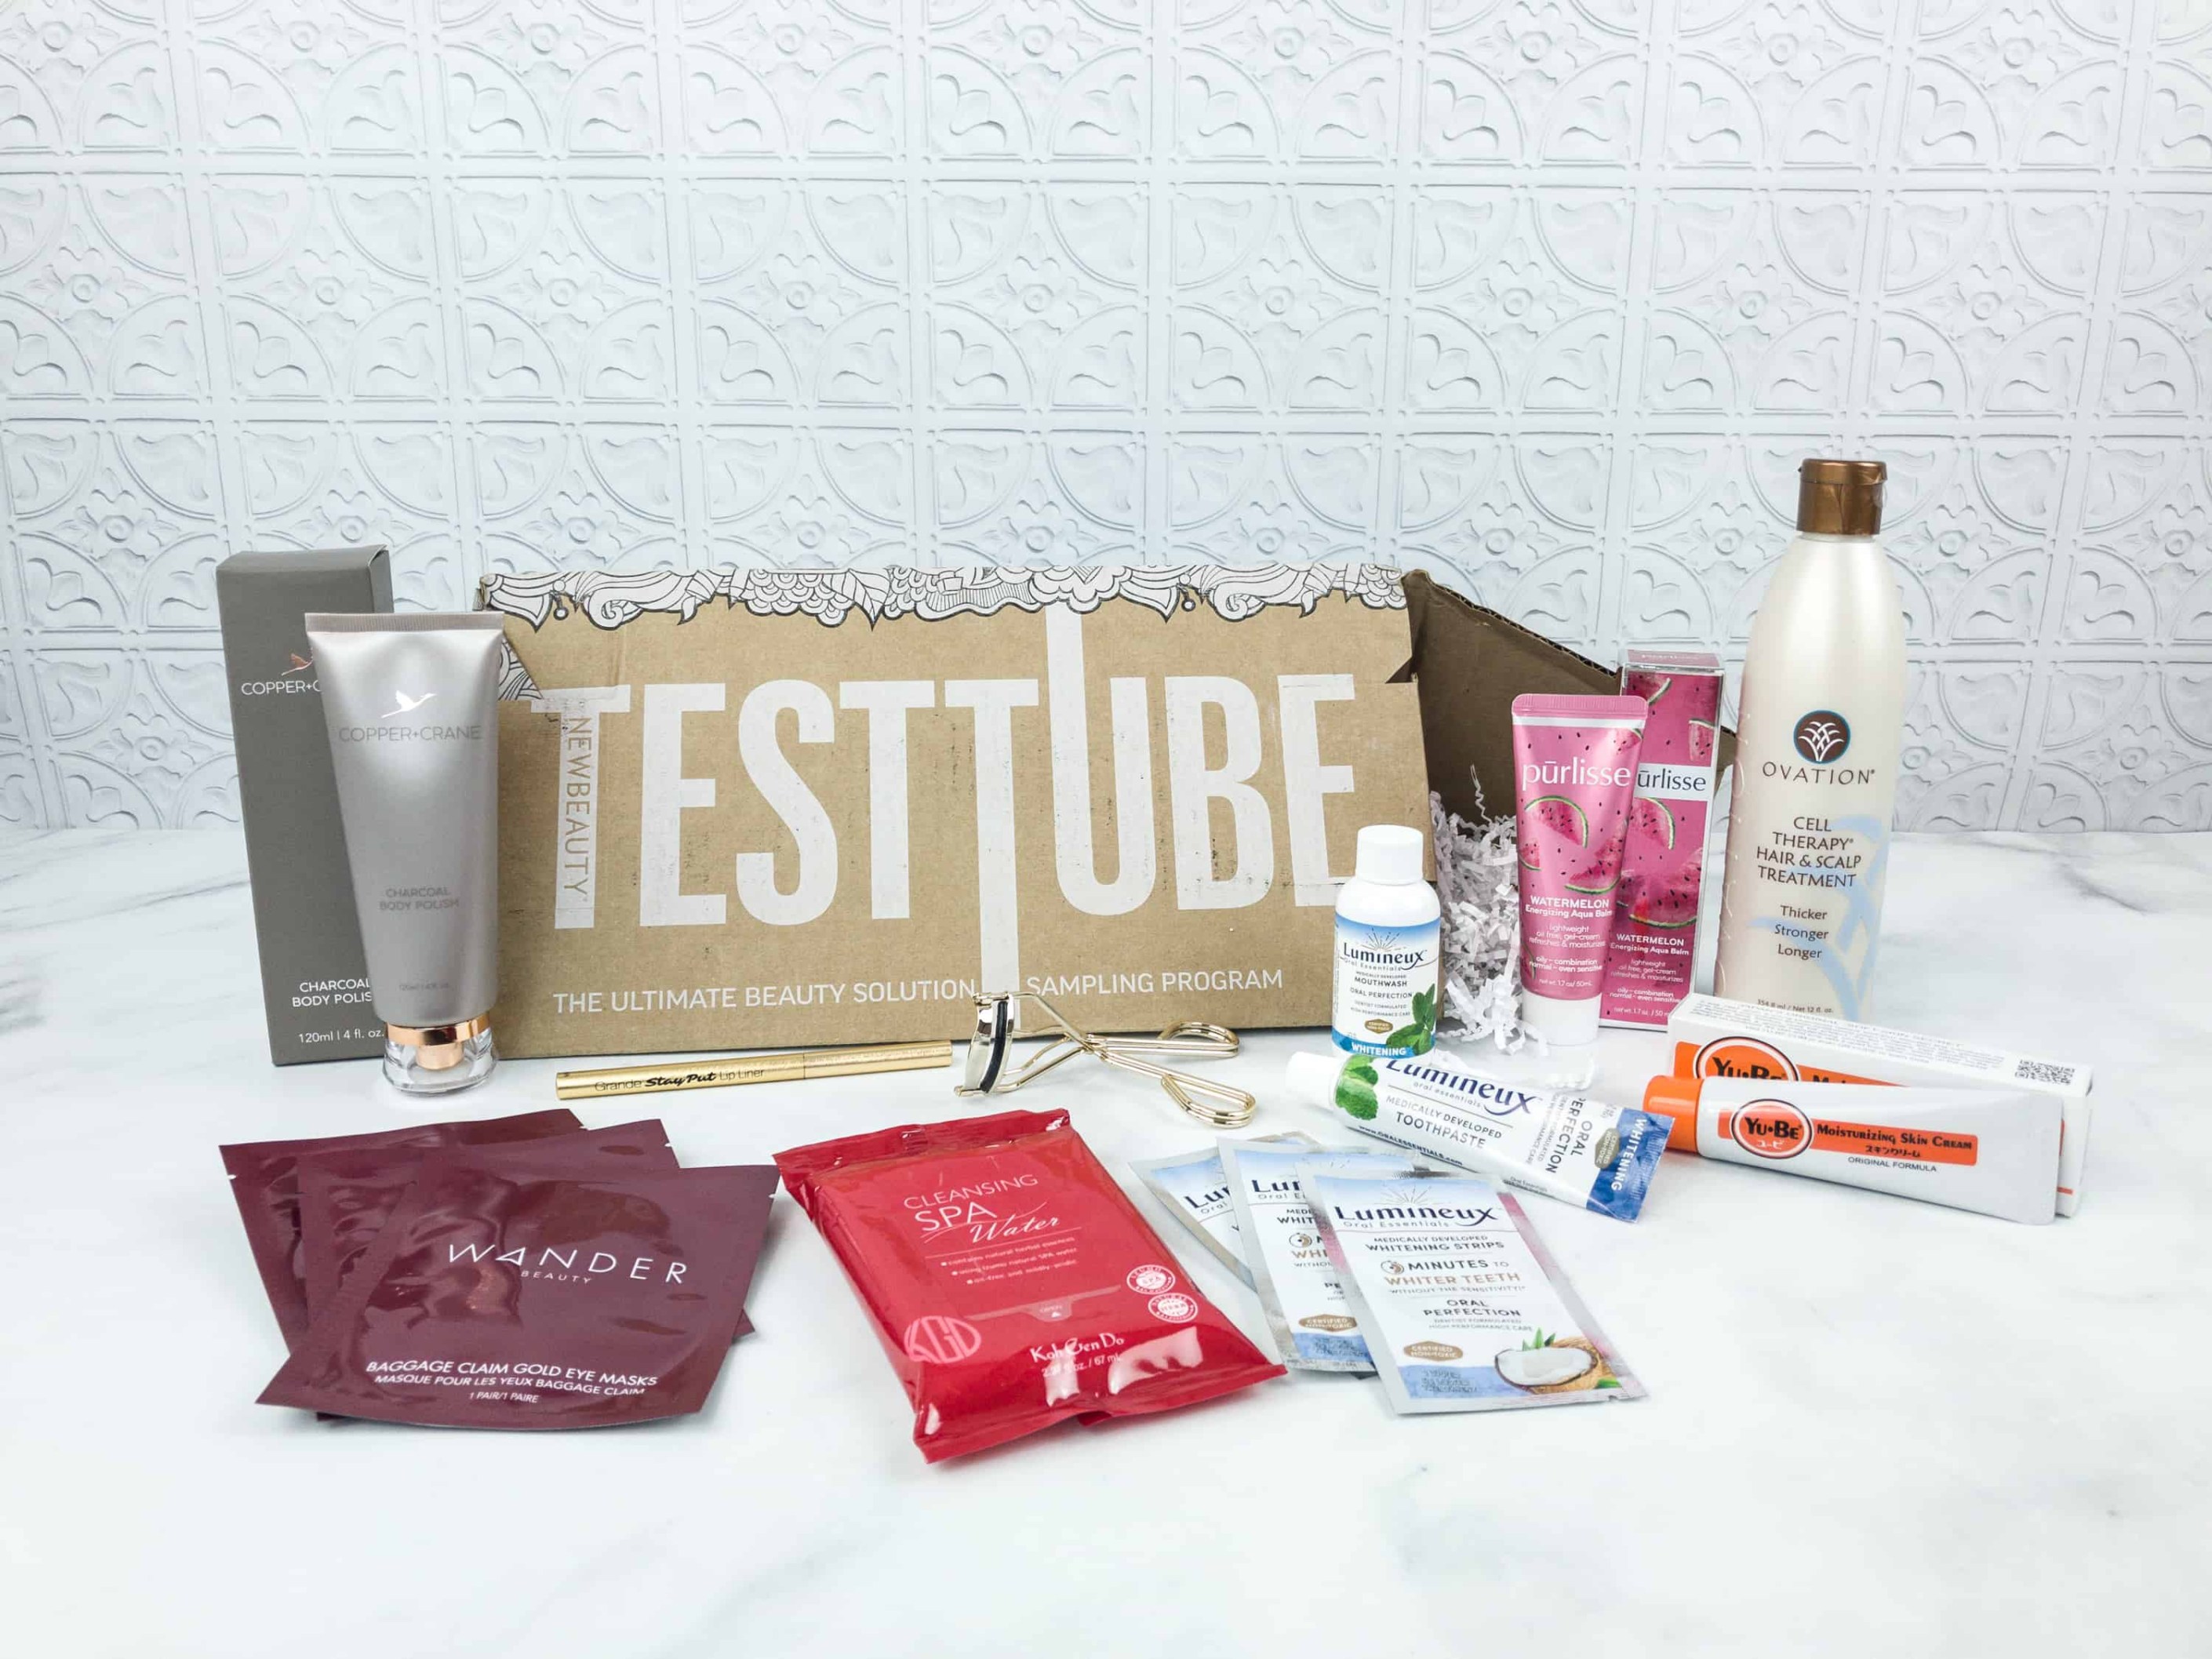 New Beauty TestTube Reviews Get All The Details At Hello Subscription!